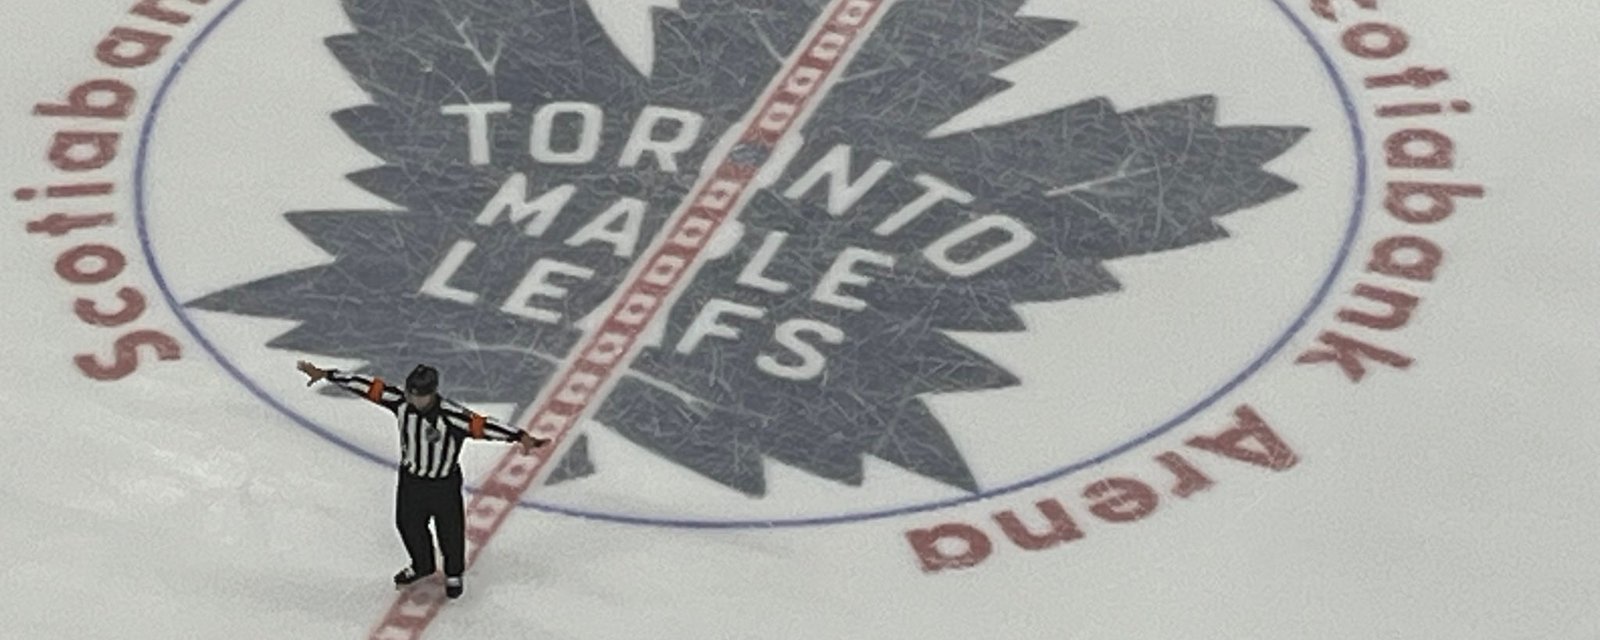 Fans outraged by Maple Leafs no-goal in Game 5, throw debris on the ice!